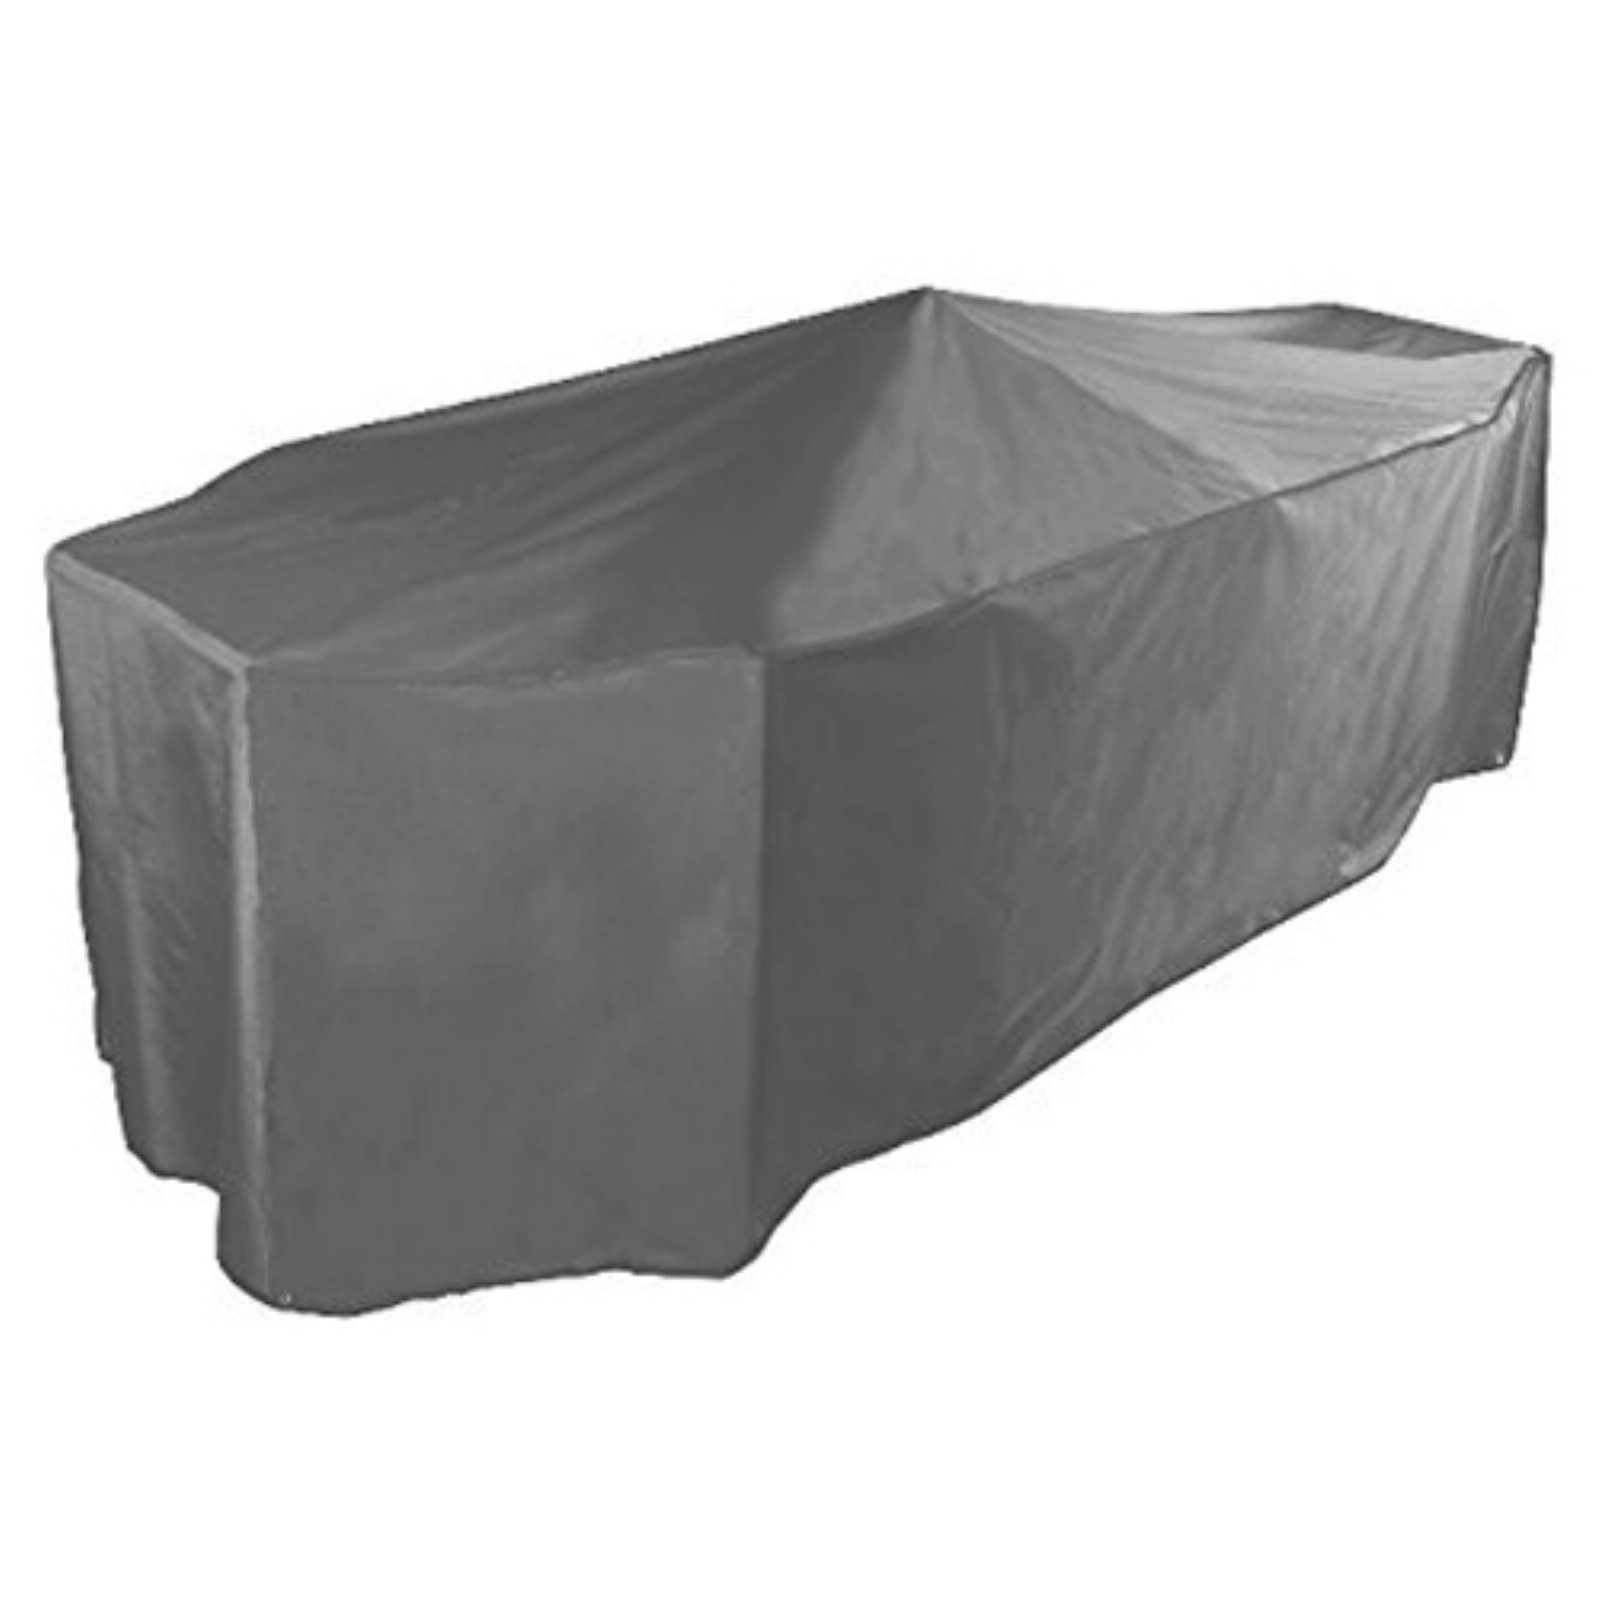 Bosmere Waterproof Grey Outdoor Rectangle Table &amp; 8 Chair Set Cover - 116L x 80W x 36H in. - image 1 of 4